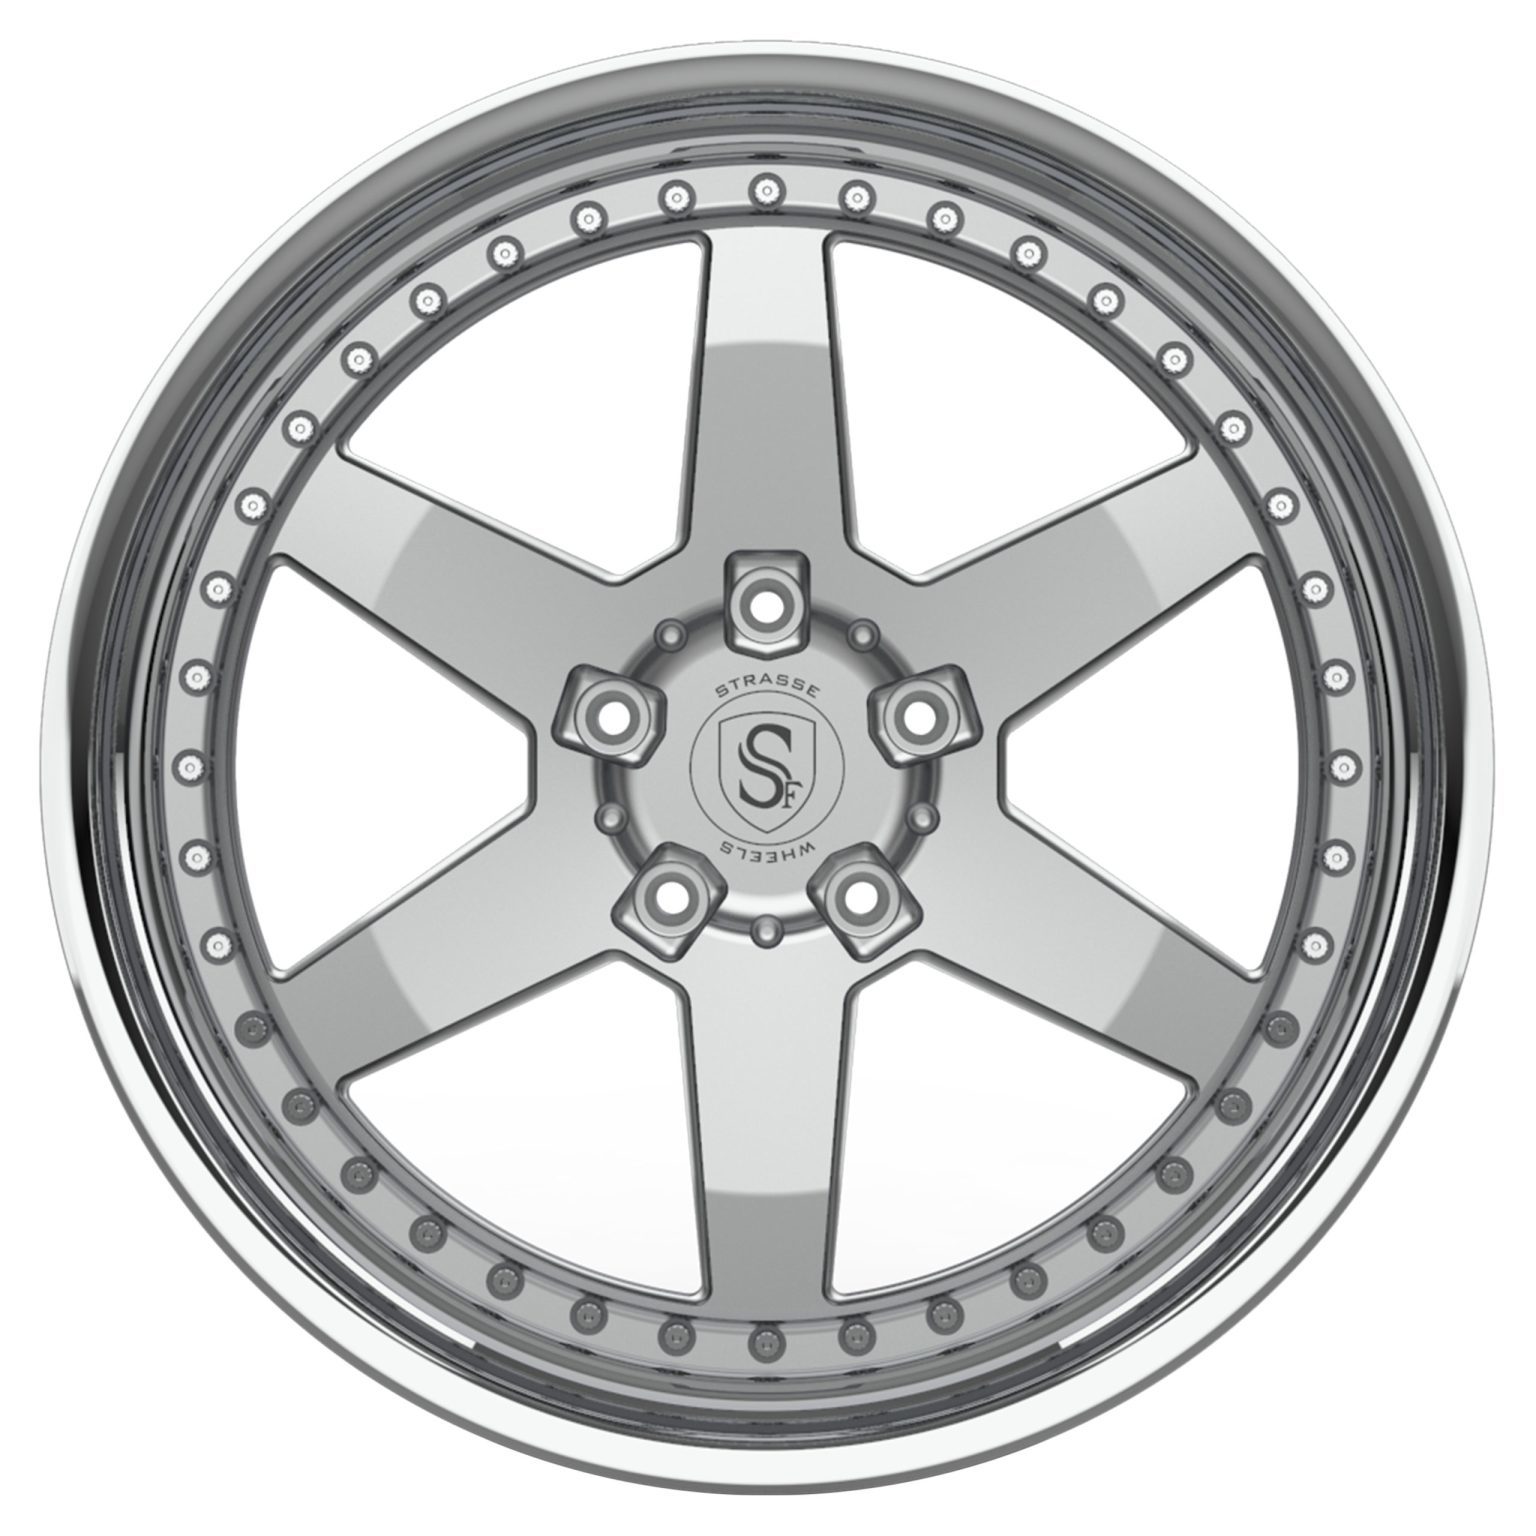 Strasse  S6 COMPETITION 3 Piece Forged Wheels